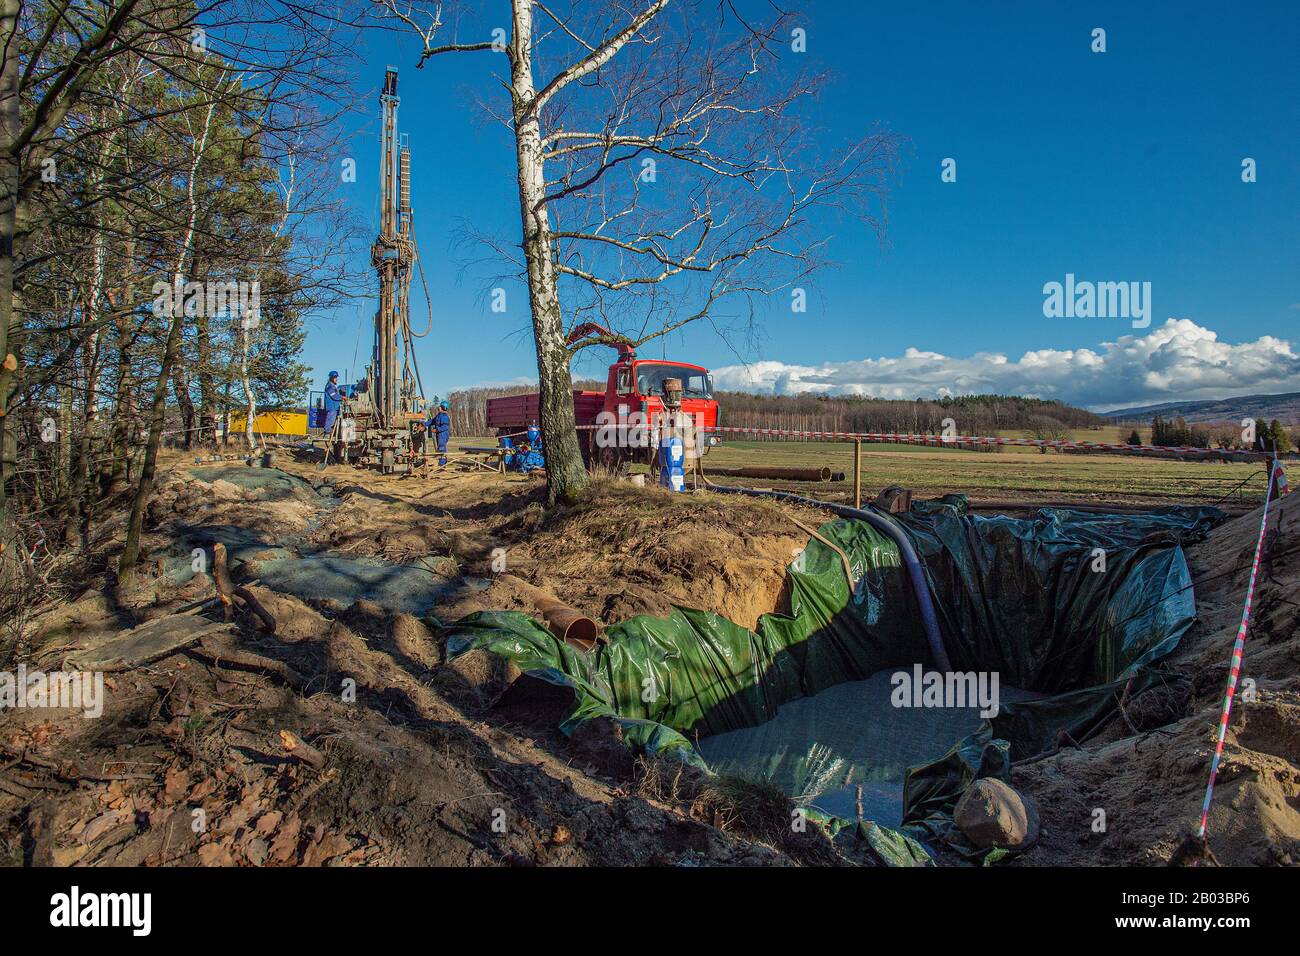 Hermanice, Czech Republic. 18th Feb, 2020. Ongoing construction of the network of water boreholes for monitoring of Turow mining impacts in the surroundings of the Turow open-pit lignite mine, near the Czech-Polish border, expanding by 16 wells, in Hermanice, Czech Republic, on February 18, 2020. The Turow mine supplies coal mainly to the nearby Turow plant, which generates 8 percent of Poland's energy supplies. The owner of both installations, PGE Group (Polska Grupa Energetyczna), plans to continue mining at the location until 2044. Credit: Radek Petrasek/CTK Photo/Alamy Live News Stock Photo